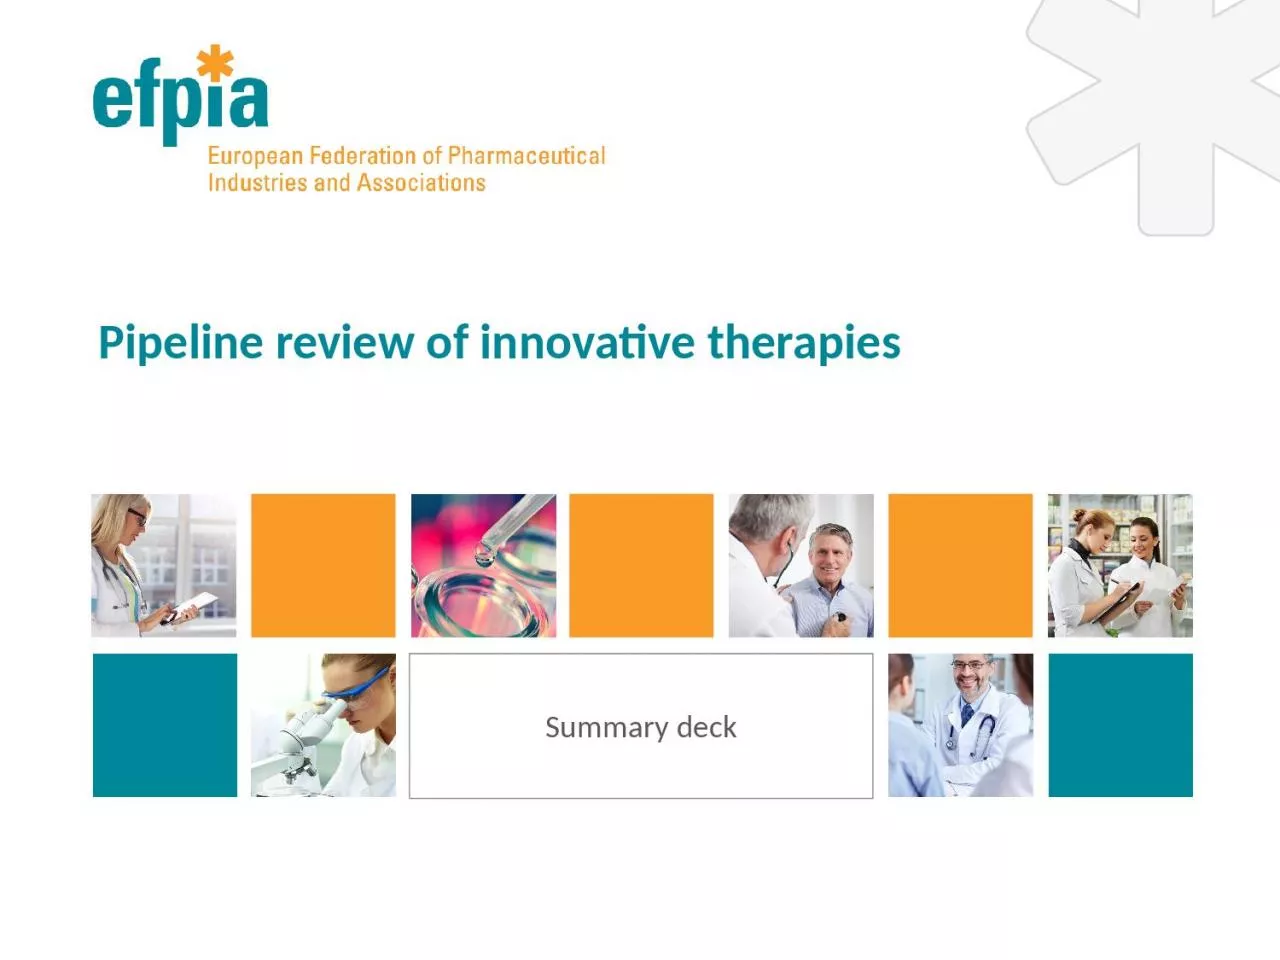 Pipeline review of innovative therapies